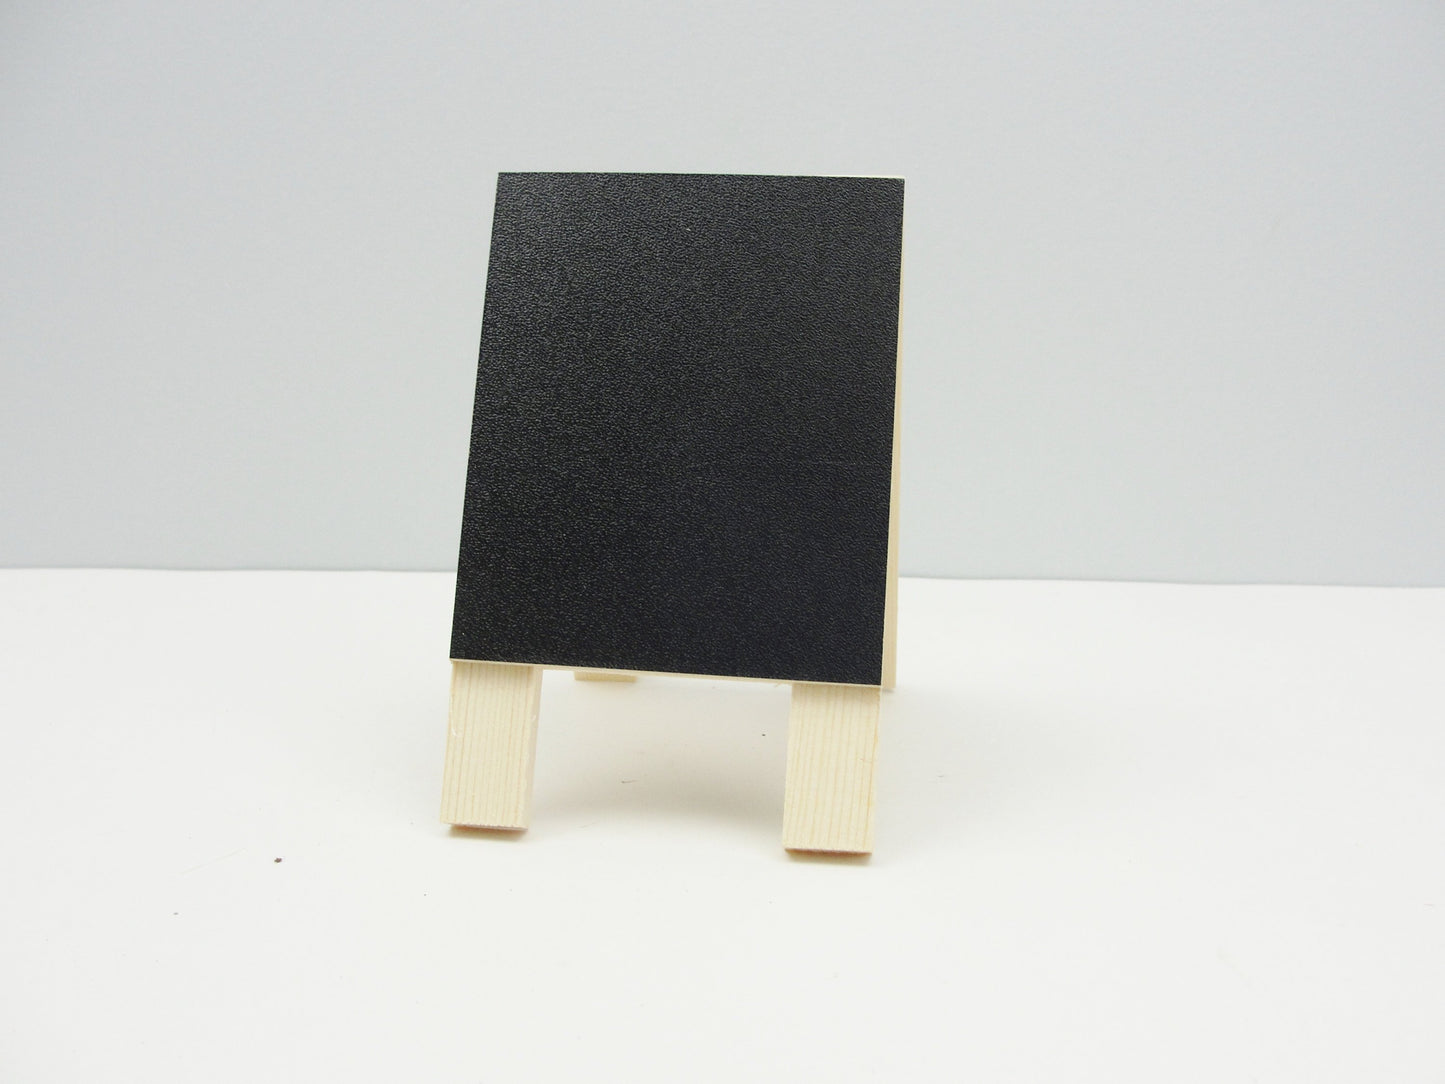 Miniature wood chalkboard easel - General Crafts - Craft Supply House